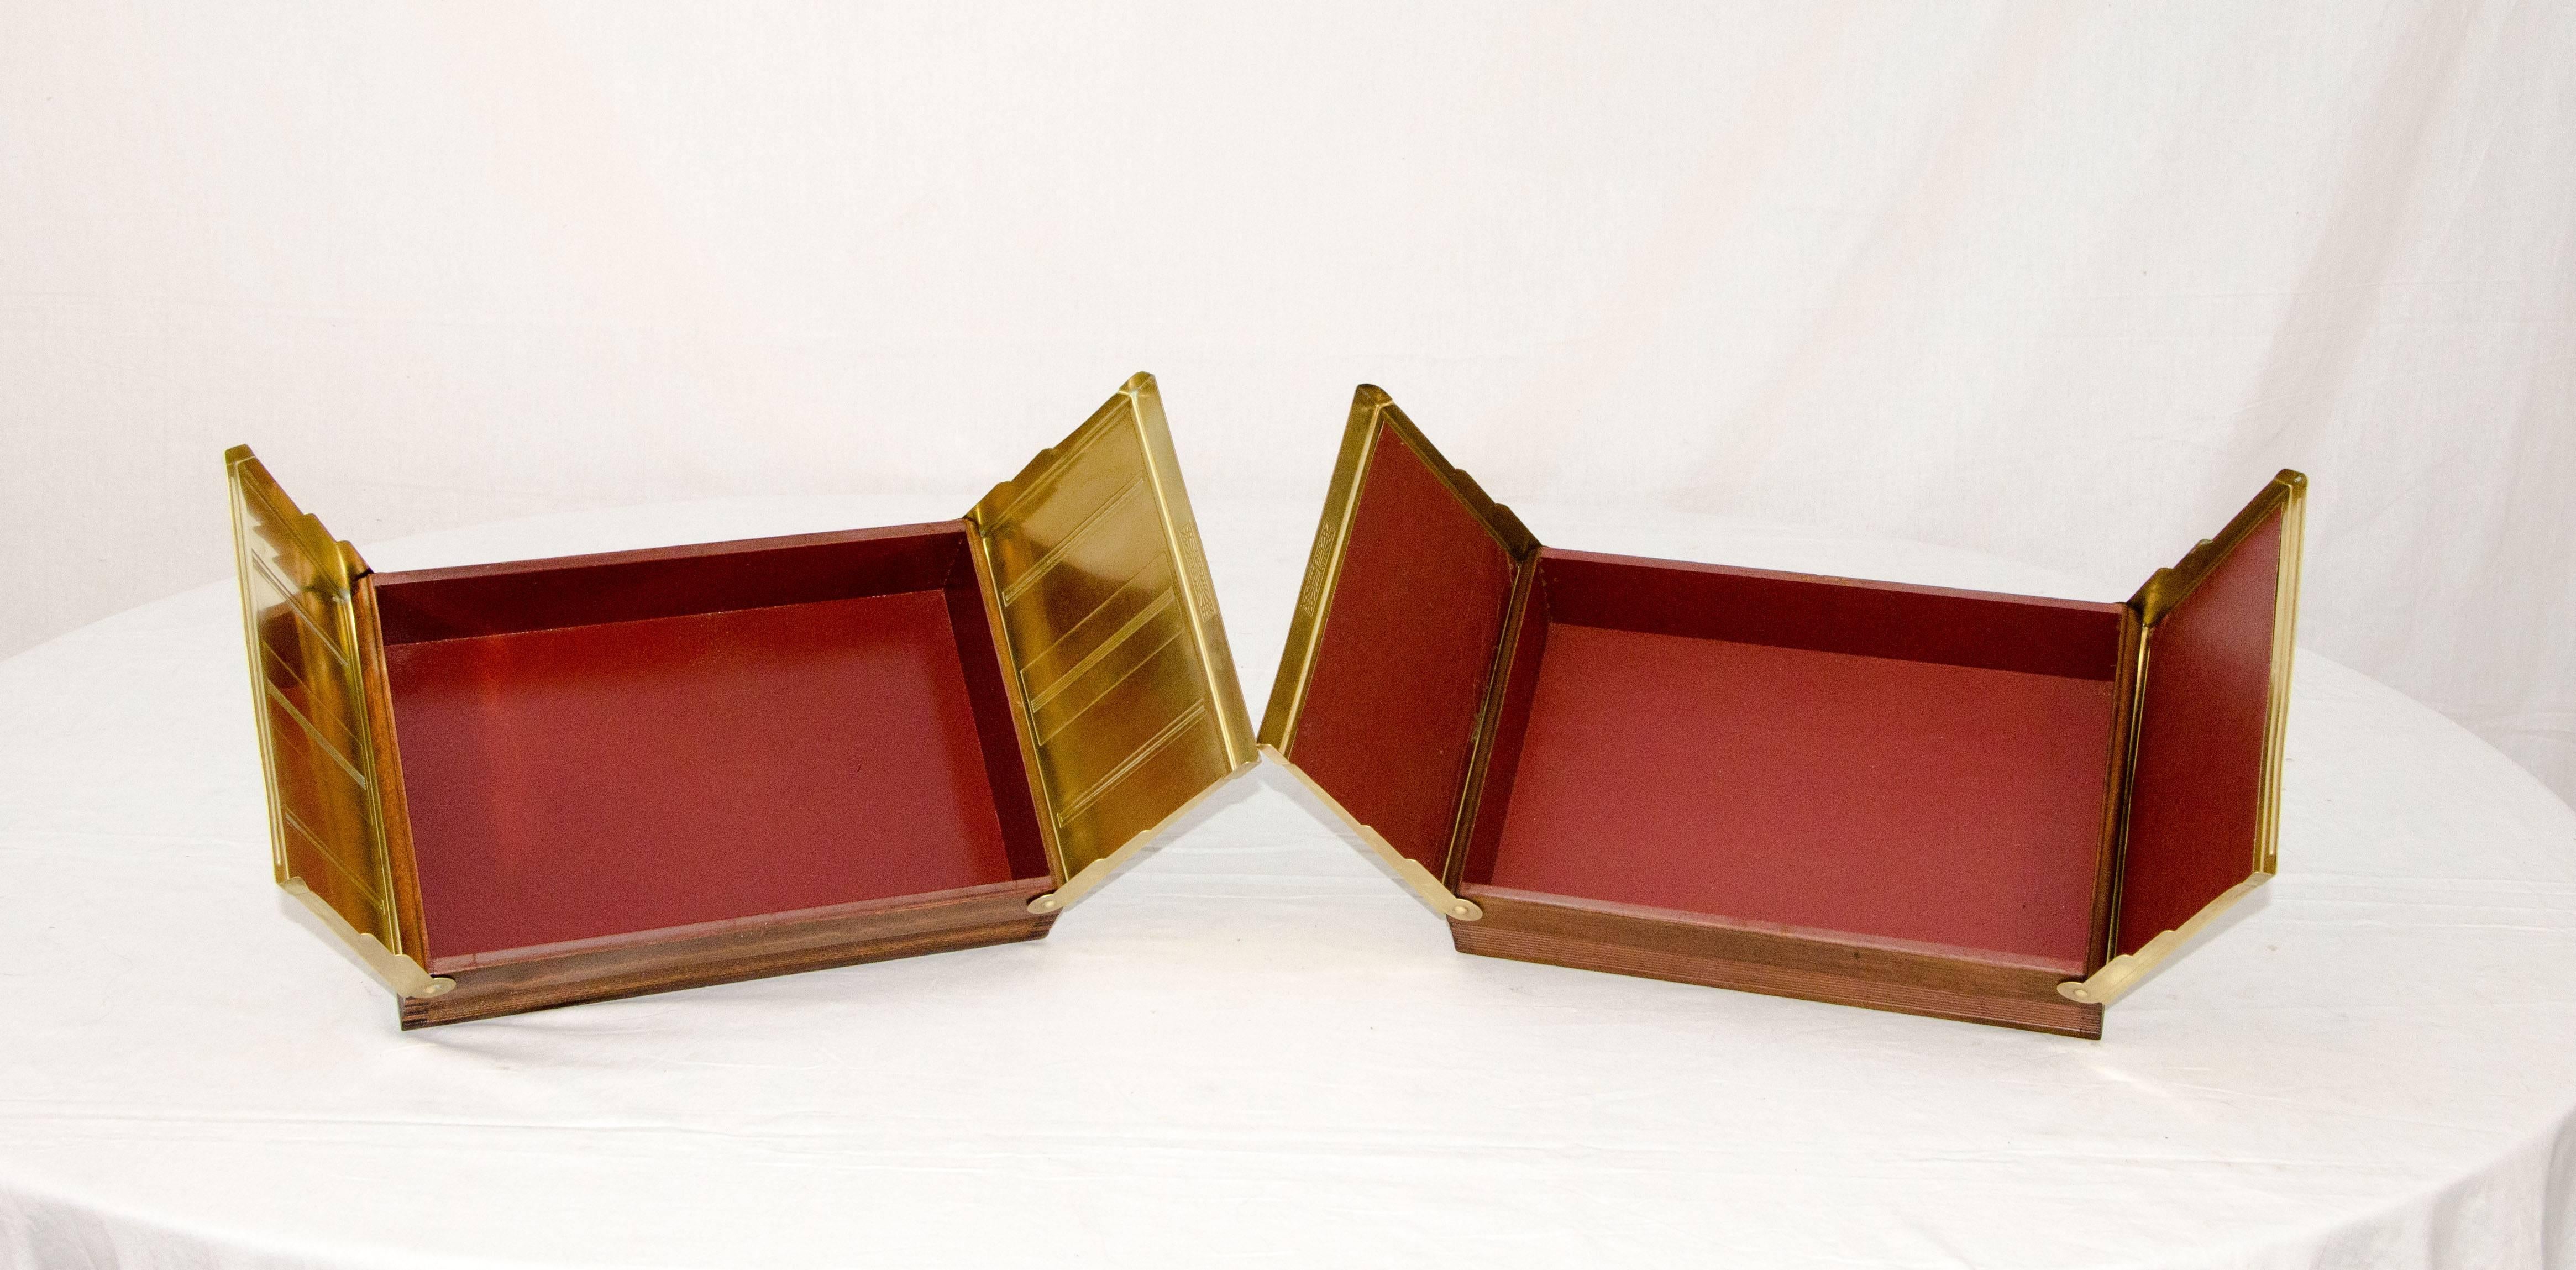 American Pair of Art Deco Boxes for Jewelry, Mail